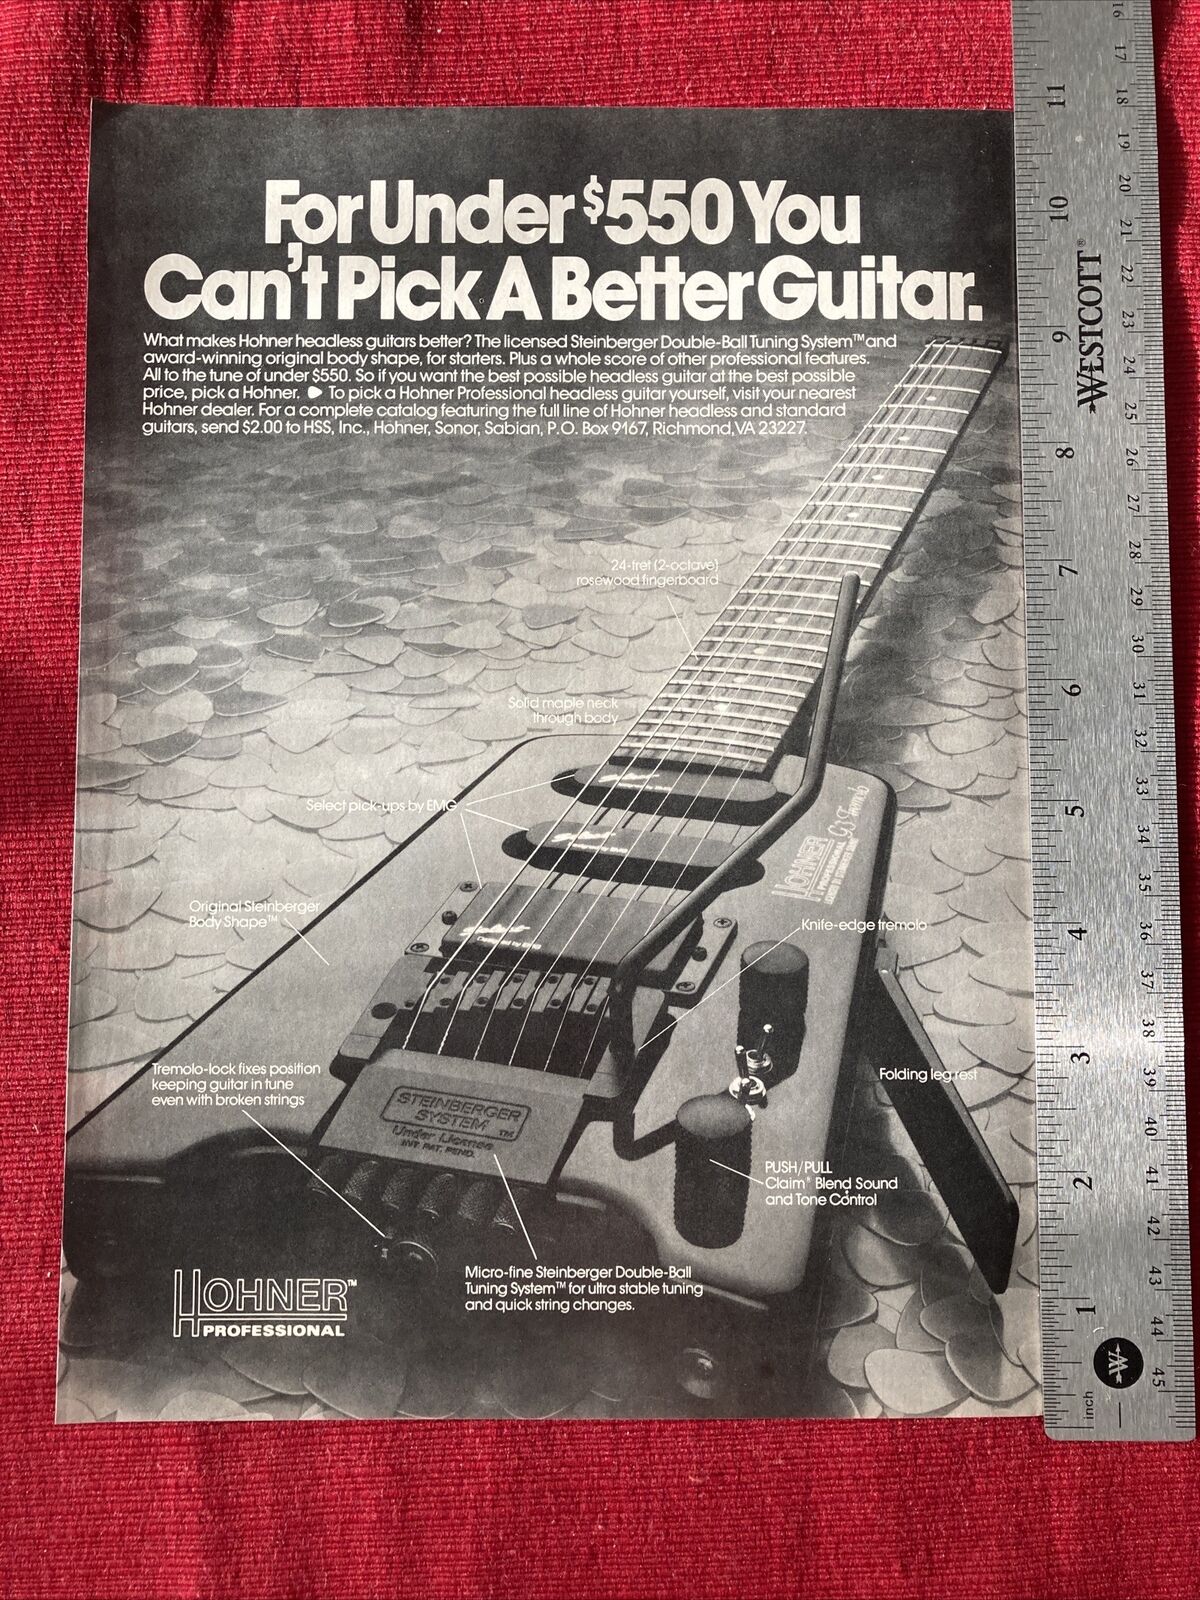 Hohner Professional Guitars 1988 Print Ad - Great To Frame